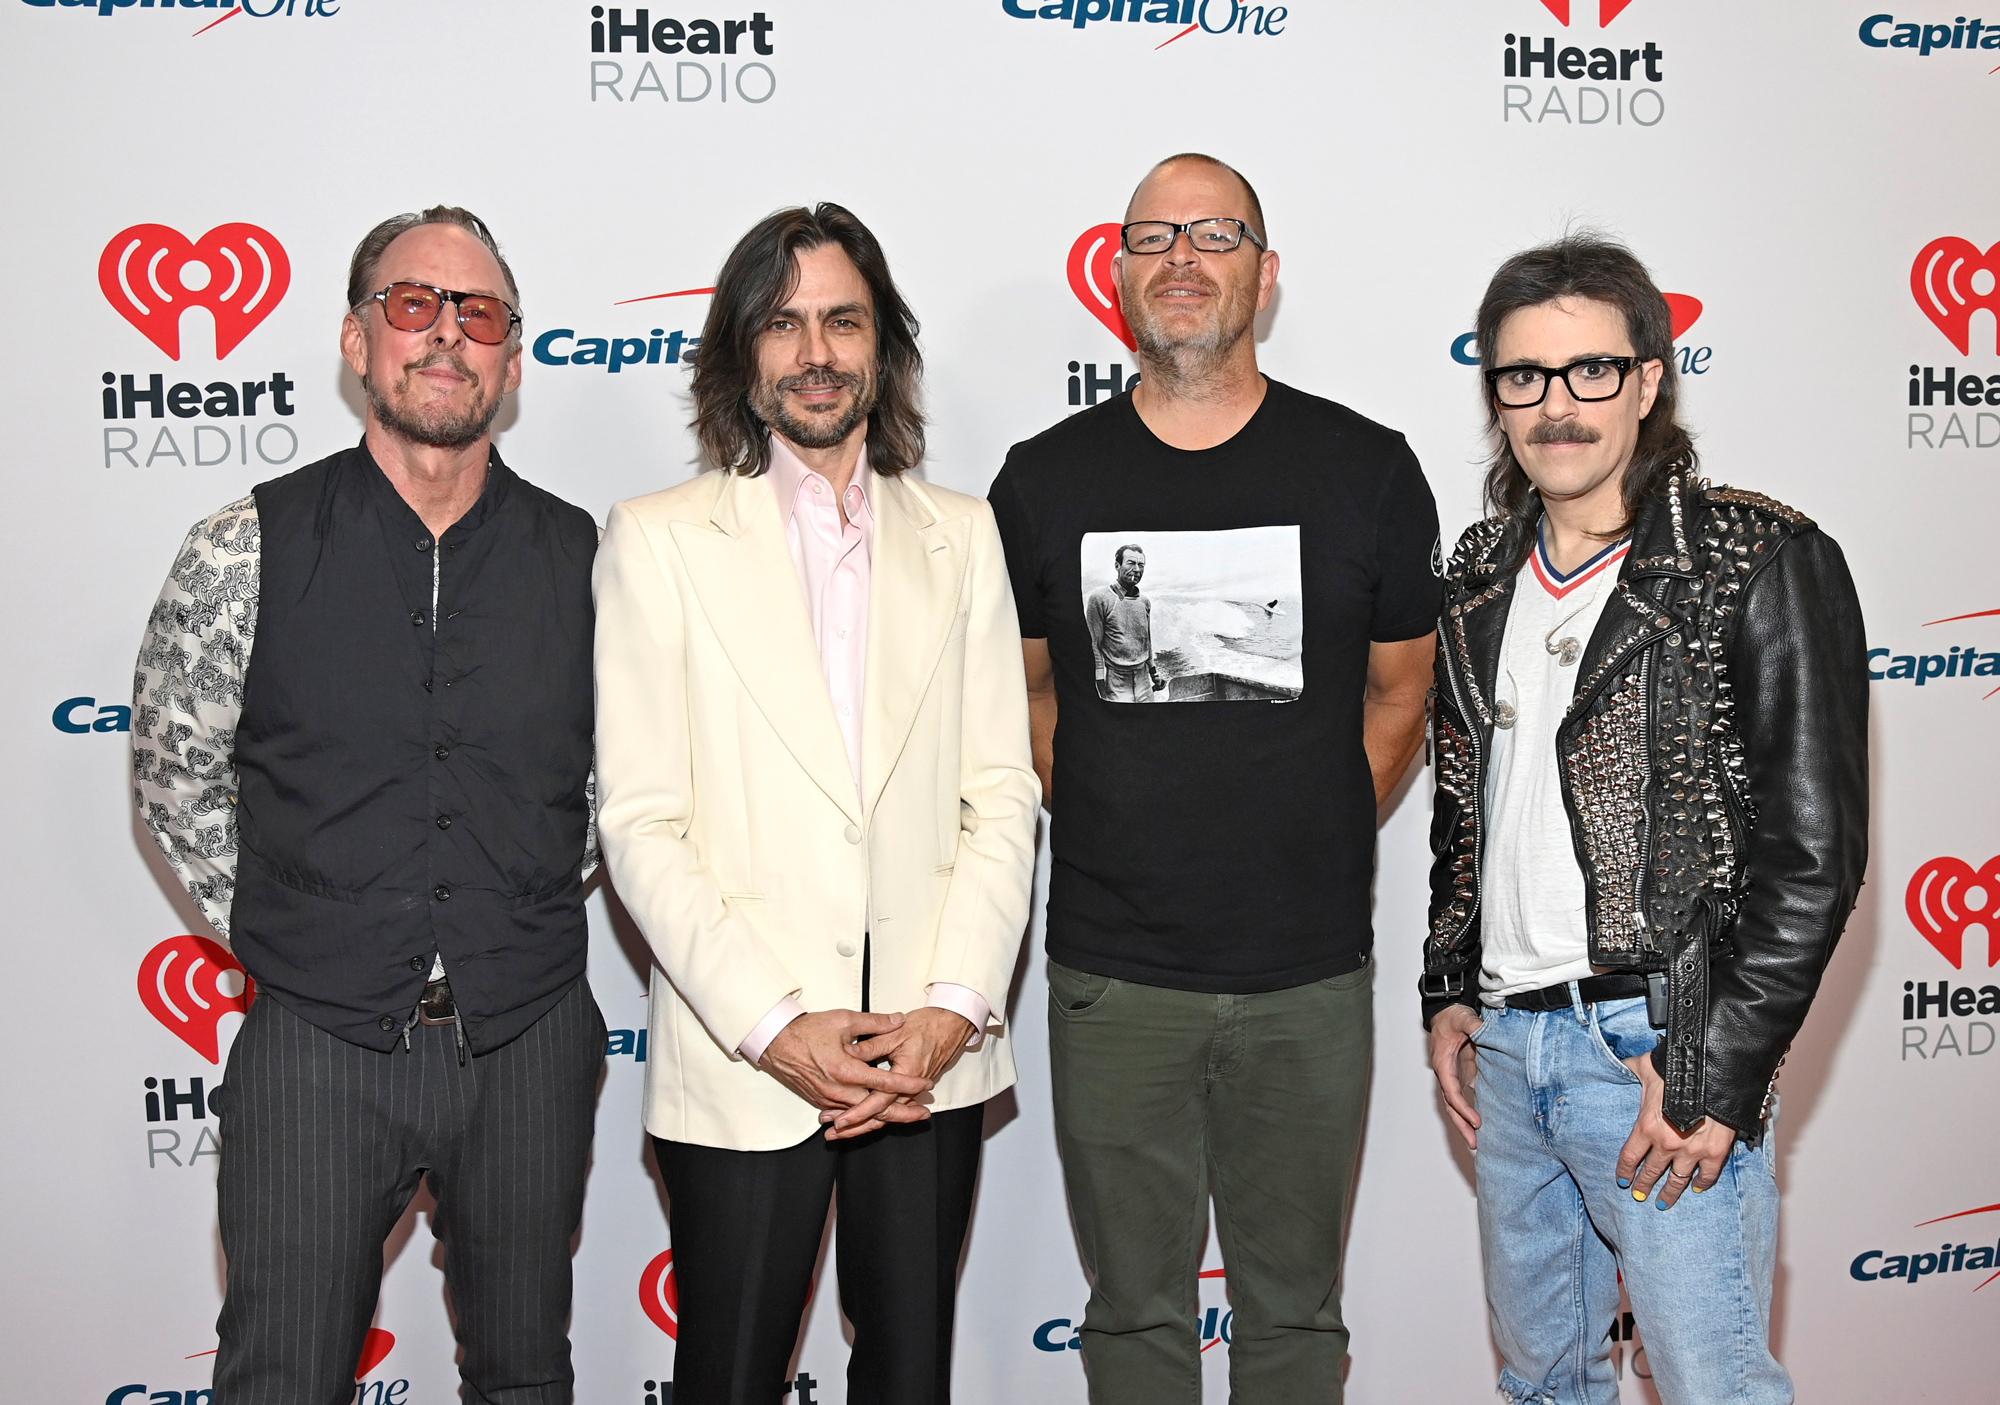 Scott Shriner, Brian Bell, Patrick Wilson, and Rivers Cuomo of Weezer attend the 2021 iHeartRadio Music Festival on September 17, 2021 at T-Mobile Arena in Las Vegas, Nevada.